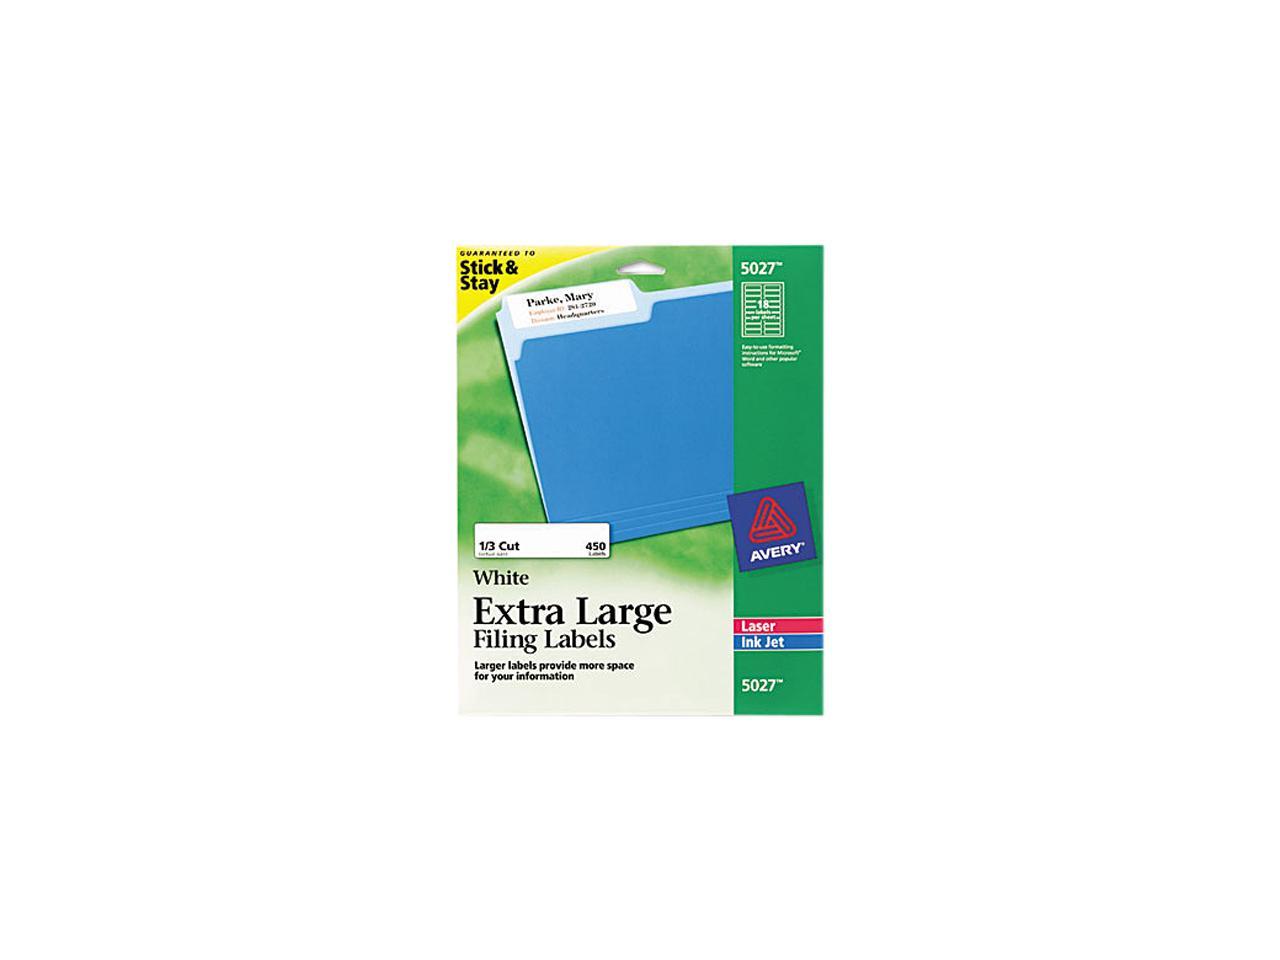 Avery 5027 ExtraLarge 1/3Cut Filing Labels, 15/16 x 37/16, White